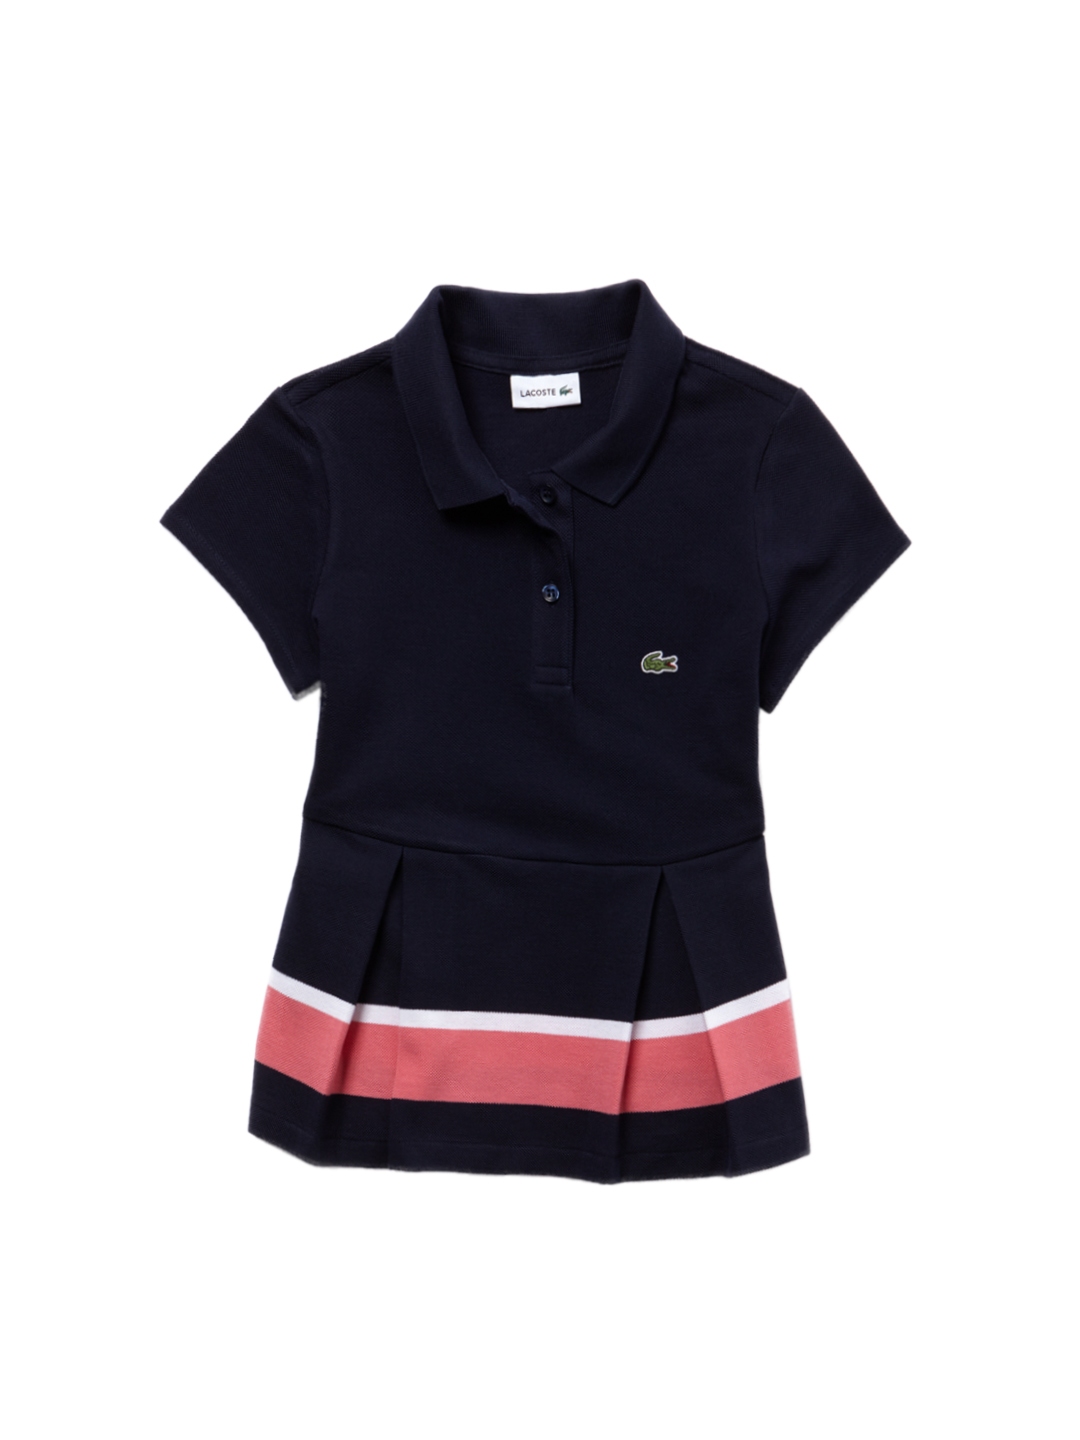 Buy Lacoste Girls Navy Blue Solid A Line Dress - Dresses for Girls ...